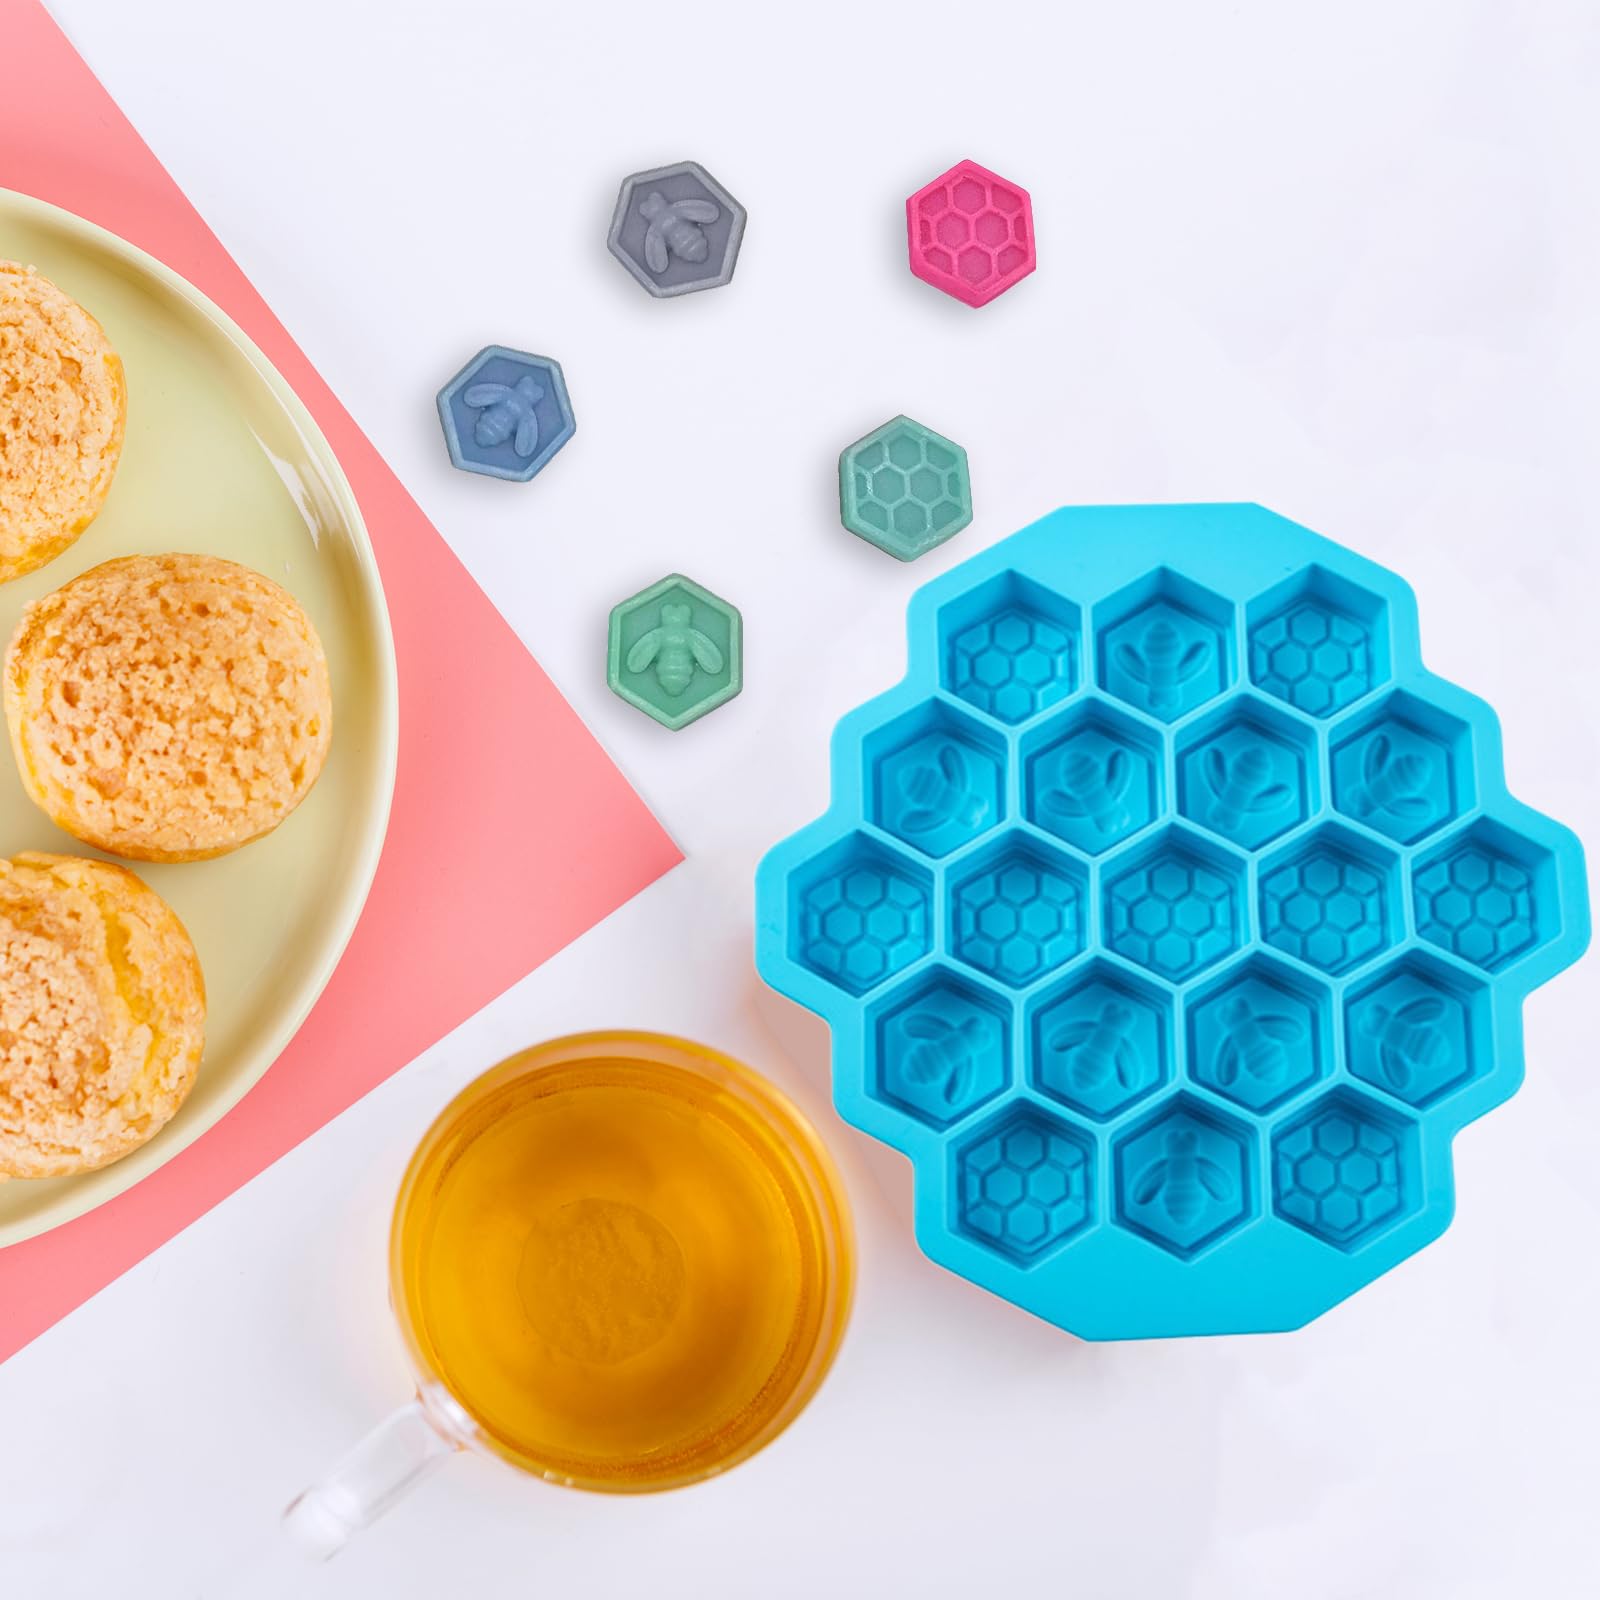 3PCS Silicone Molds Bee Honeycomb, LIOUCBD Non-Stick Chocolate Molds, 19 Cavities Cake Baking Moulds Food Grade Silicone Baking Molds for Candy, Jelly, Ice Cube, Soap (Pink, Blue, Green)